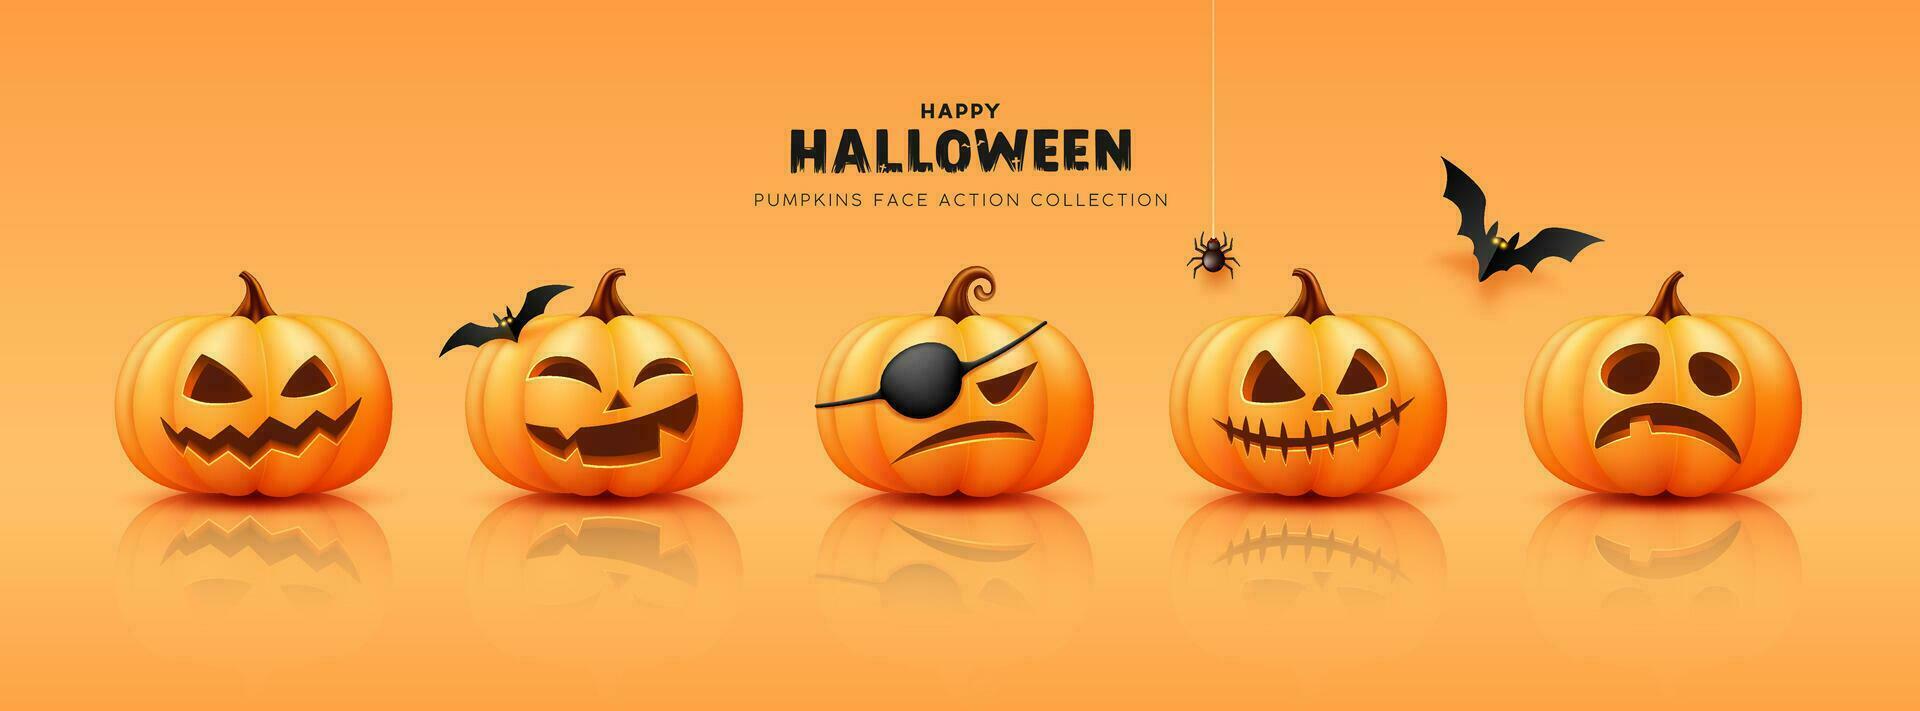 Pumpkins face action collections with shadow, halloween concept design on orange background, Eps 10 vector illustration